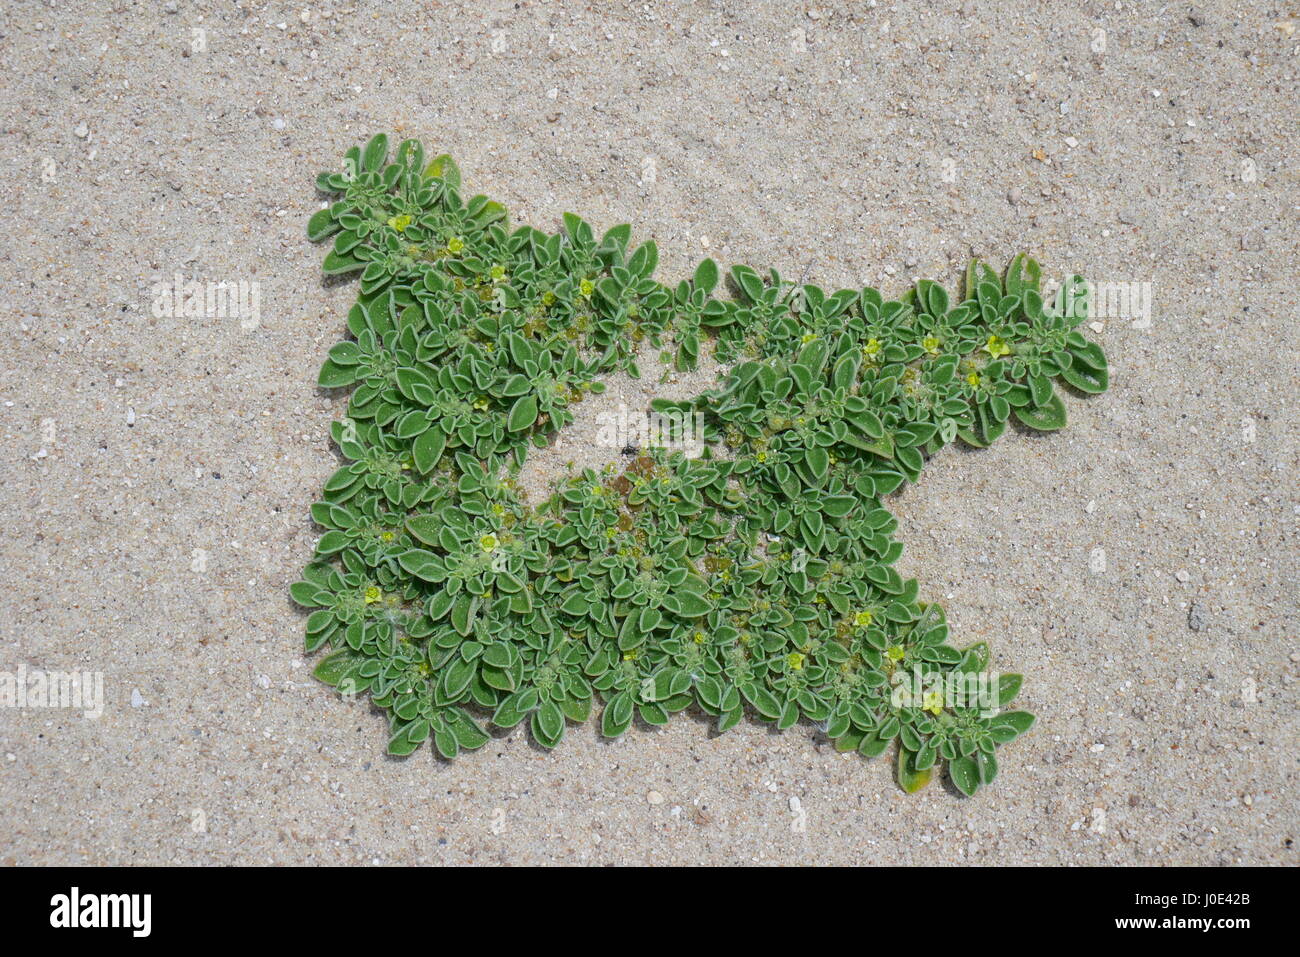 Aizoon canariense growing in the desert, Kingdom of Bahrain Stock Photo